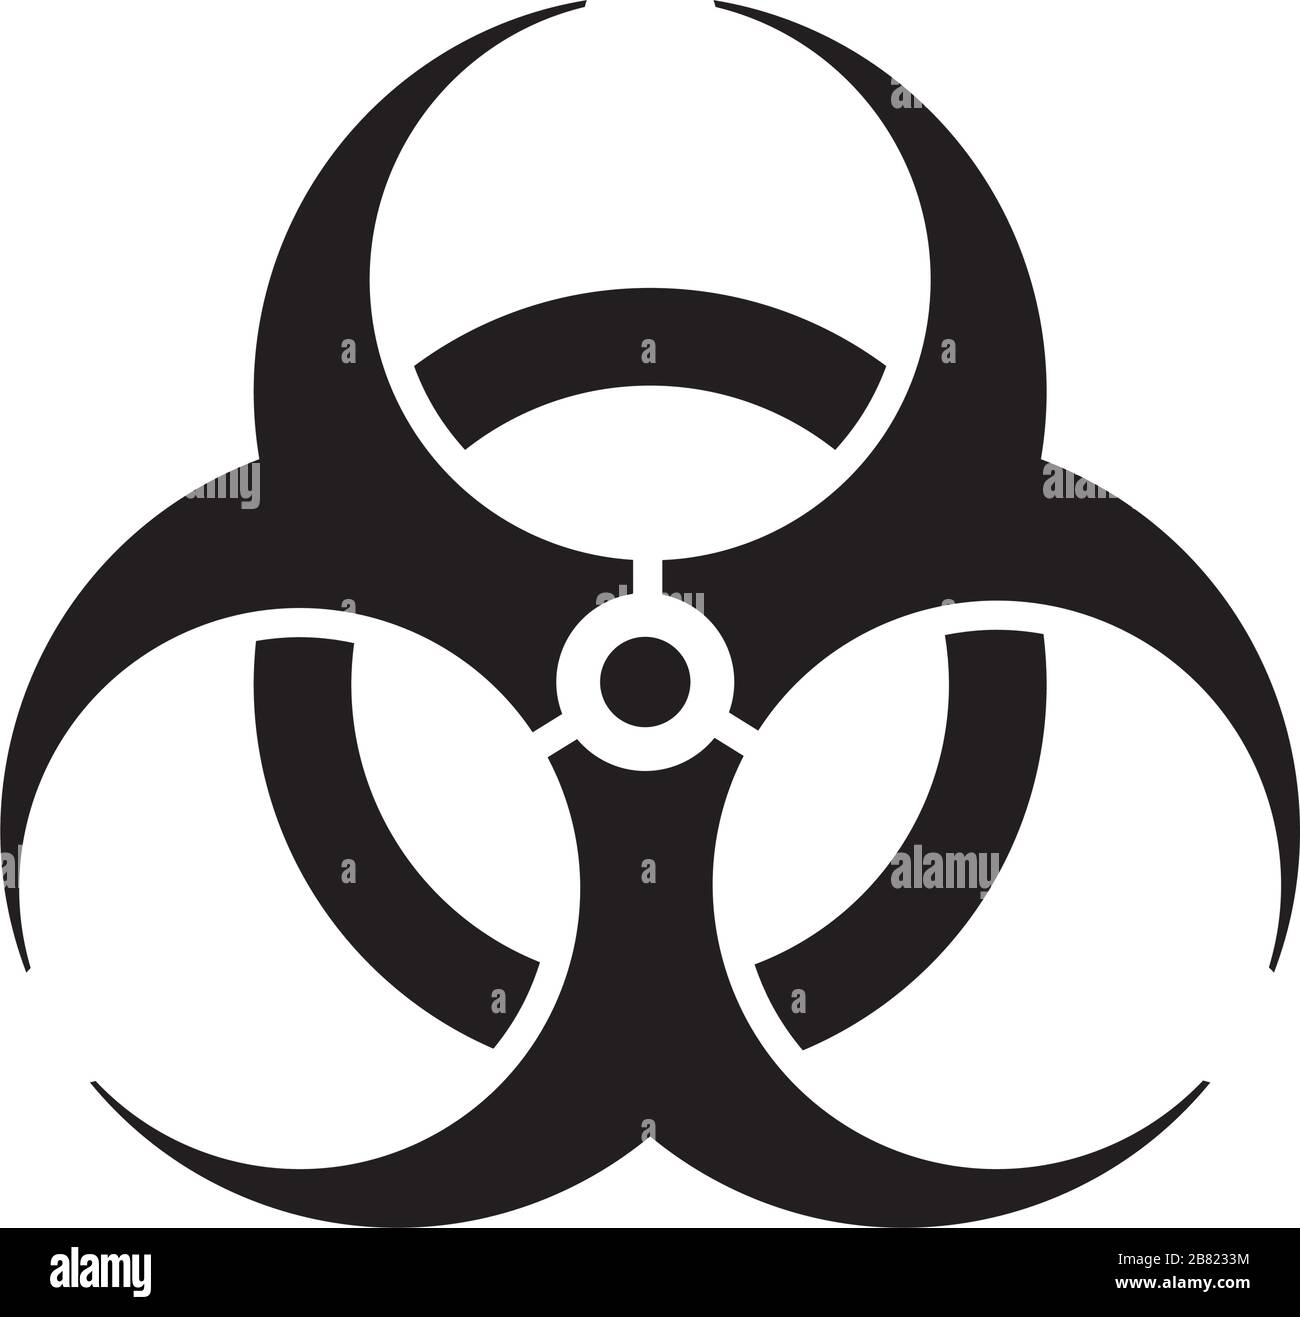 Biohazard Sign (danger caution sign), Pandemic Expansion Symbol. The emblem of pathogen infection and the spread of the diseases. Stock Vector